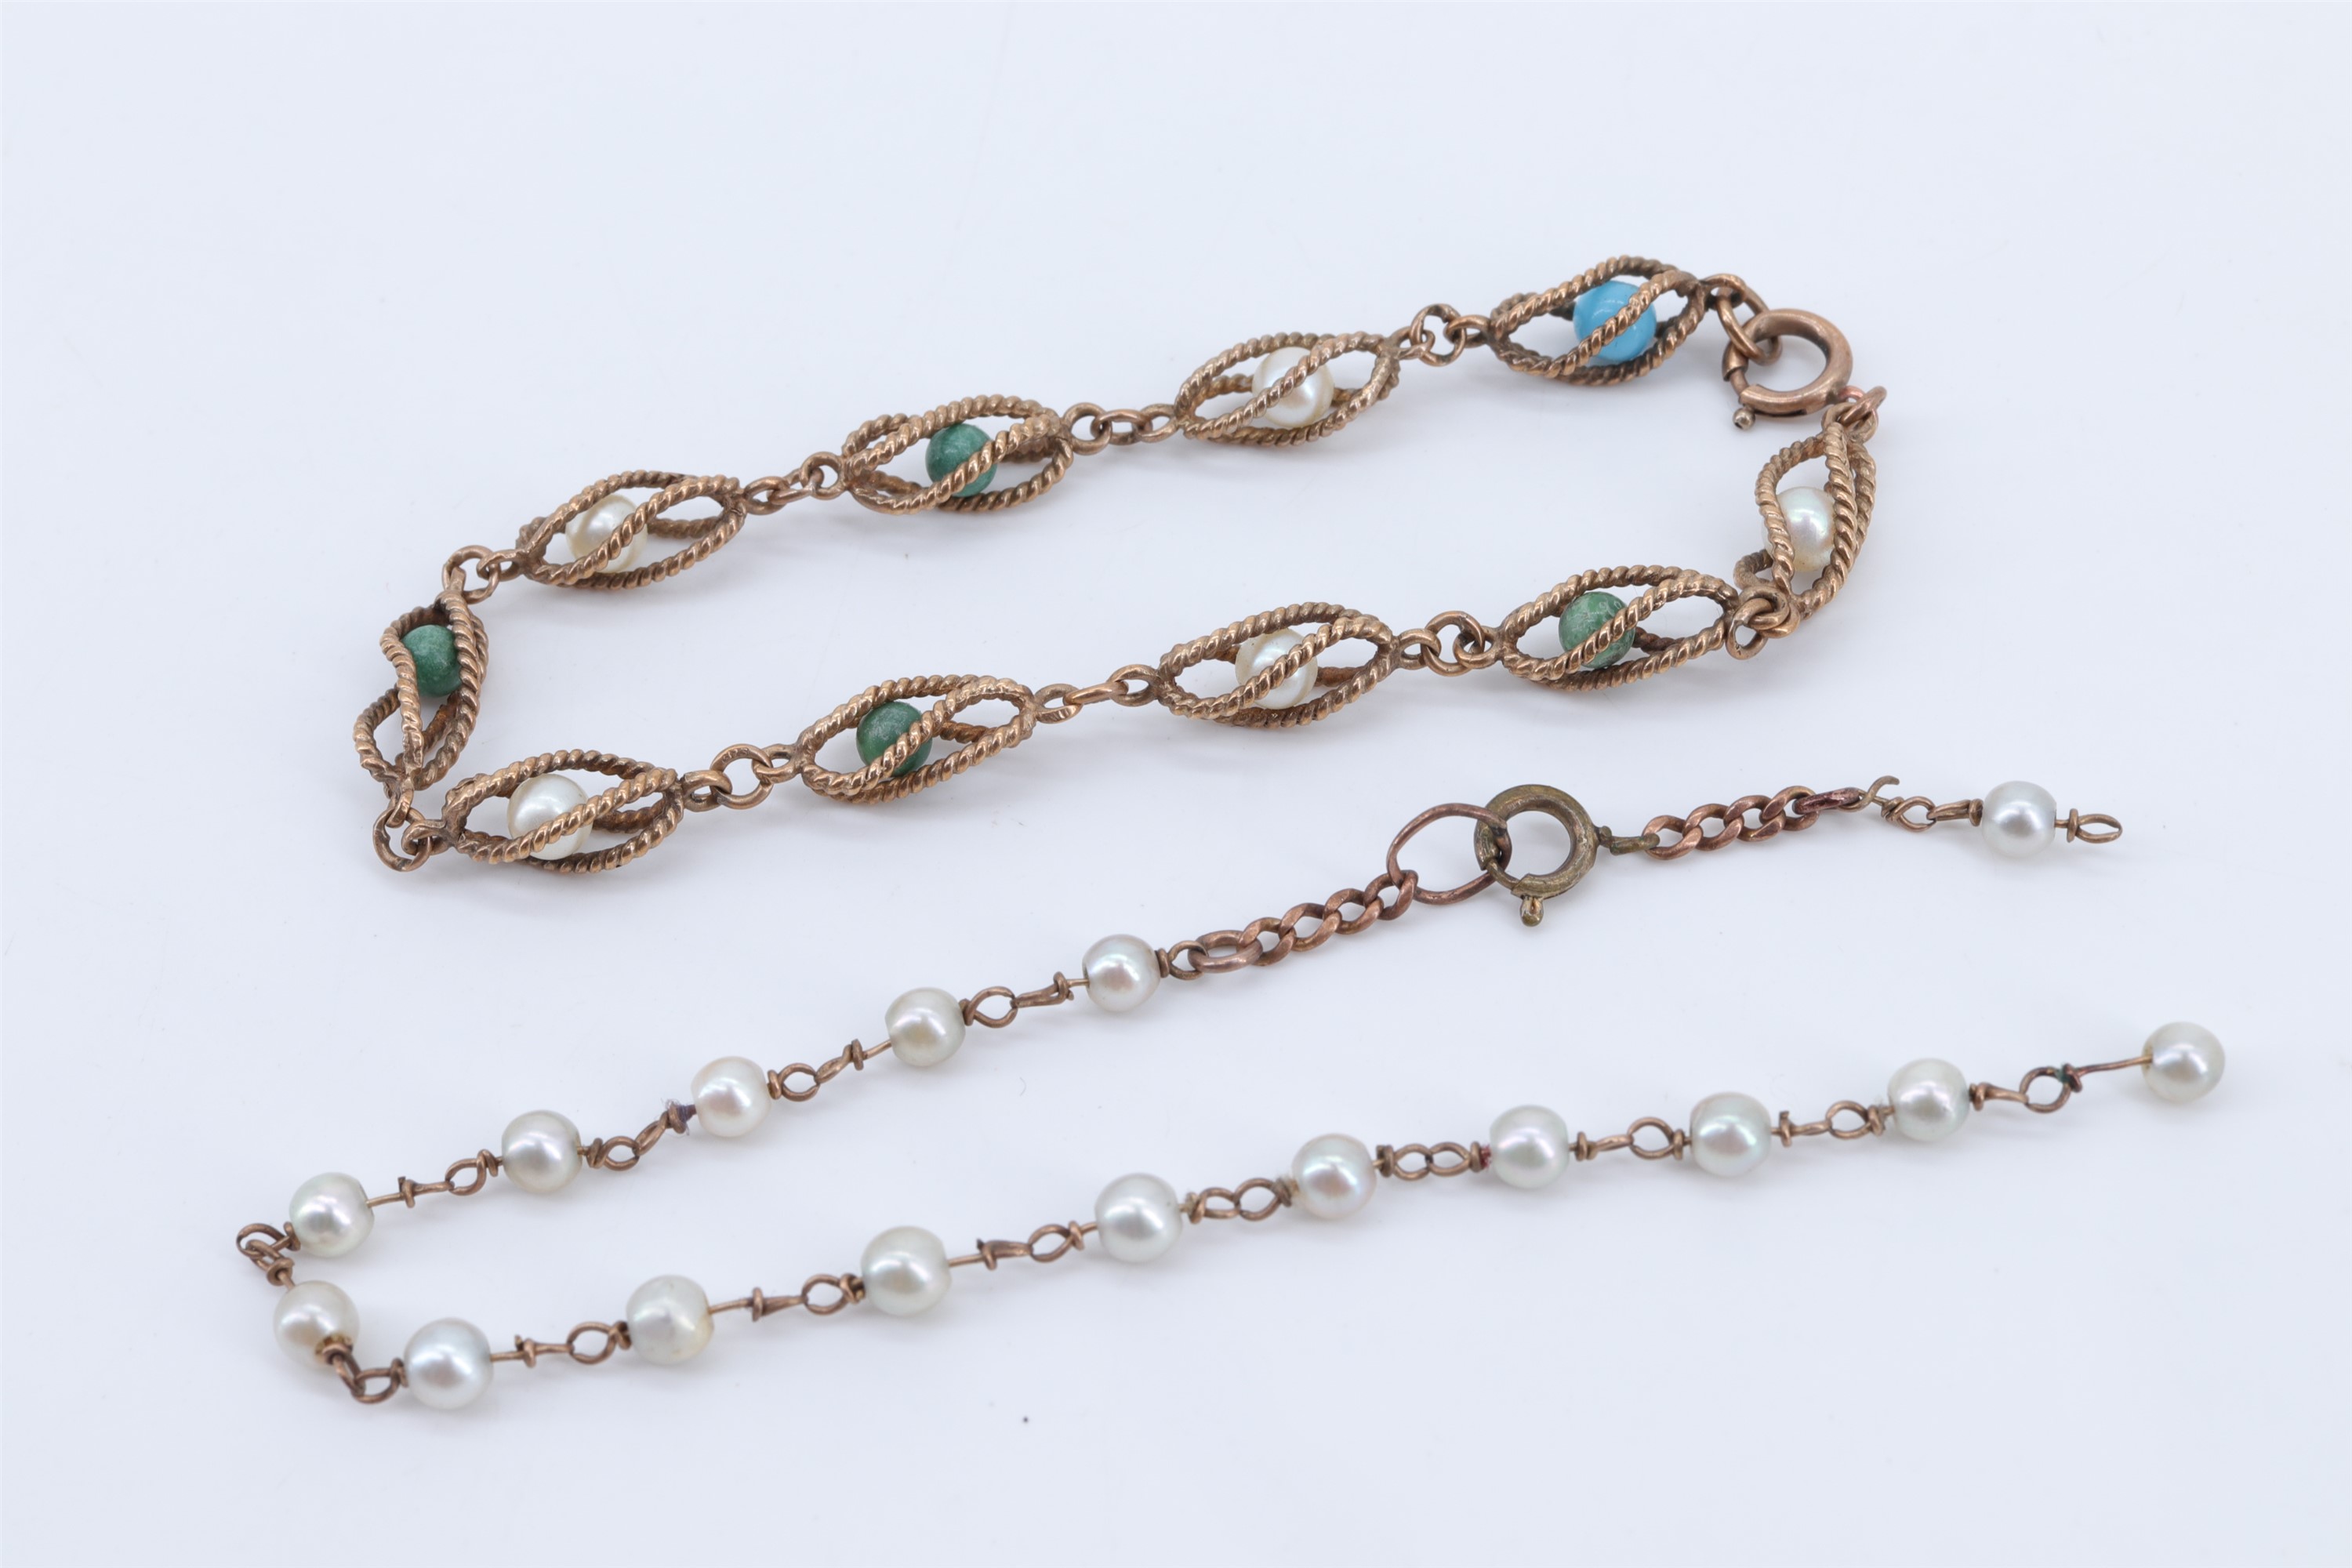 A vintage 9 ct gold, pearl and turquoise bead bracelet, the pearls and beads captive within spiral